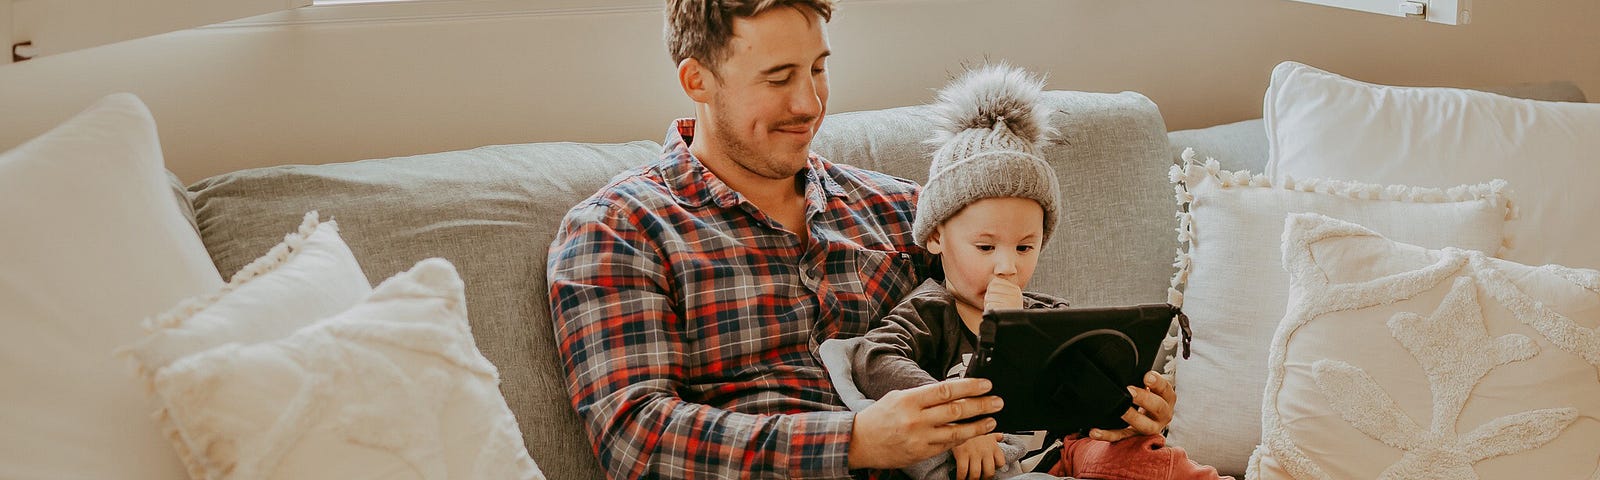 A father and young son sit on a couch watching something on an iPad together.